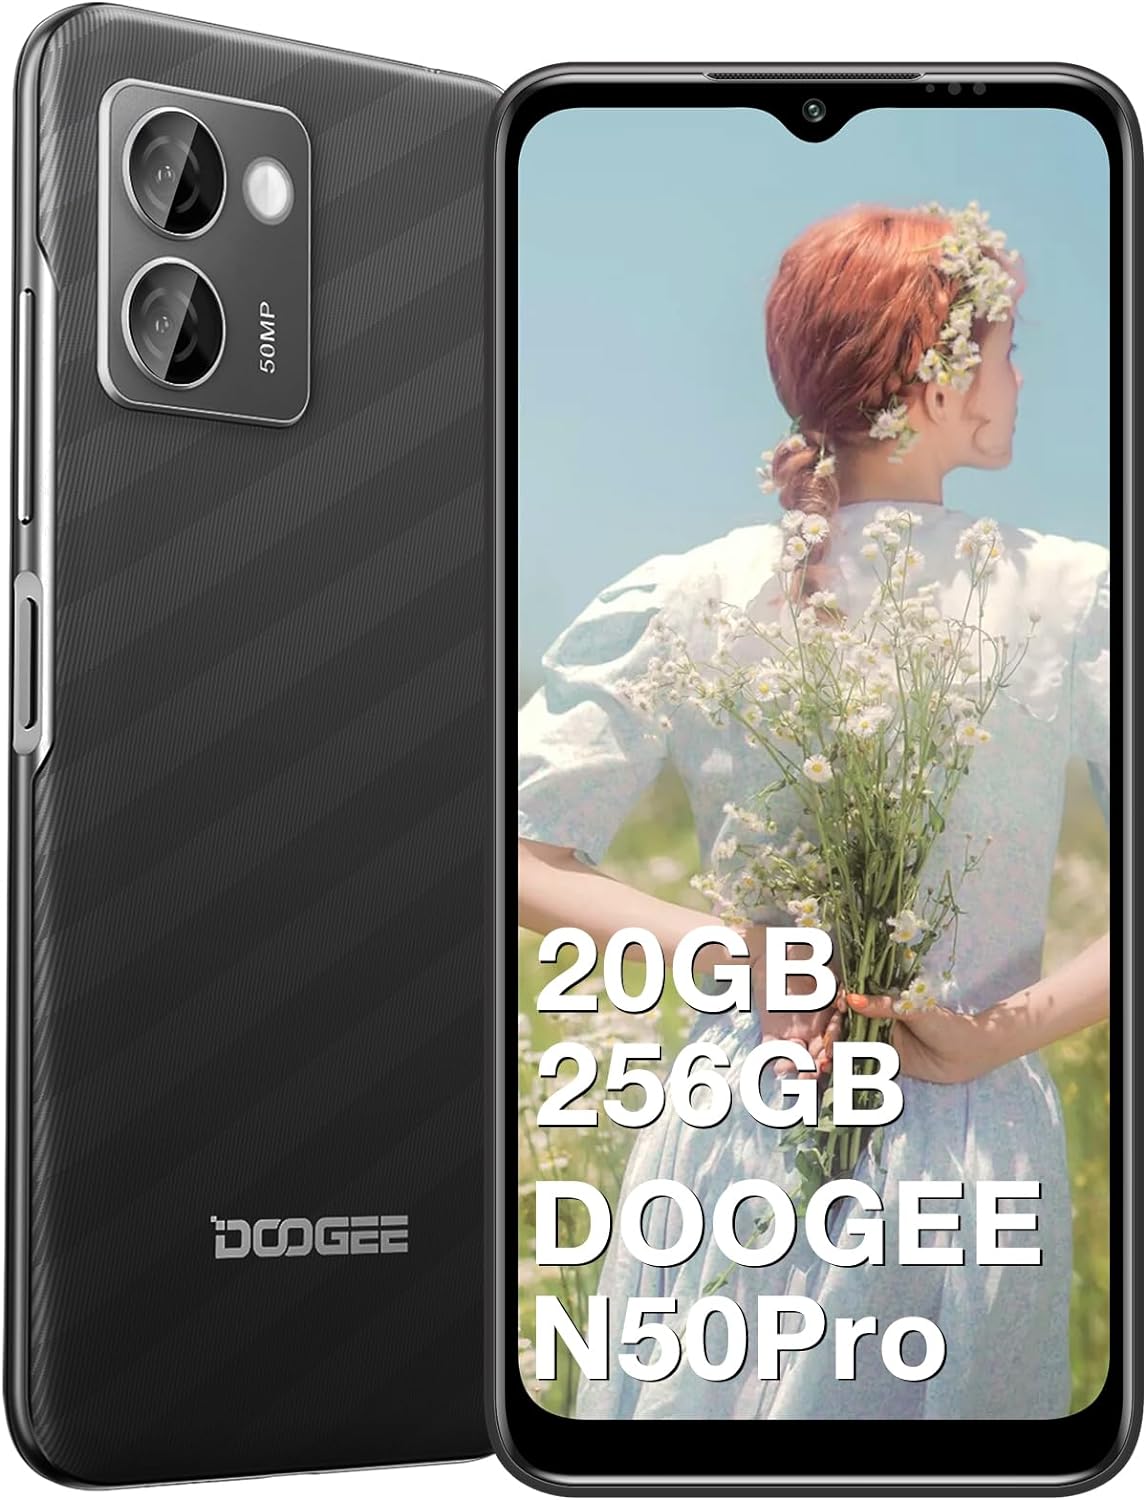 DOOGEE Android 13 Smartphone N50 Pro 6.52'' HD+, Octa Core 20GB + 256GB(Expand 1TB), 4200mAh Battery, 50MP Triple Camera, Dual SIM, Smart PA K9 Amplifier, Face Unlocked Cell Phone (Black)